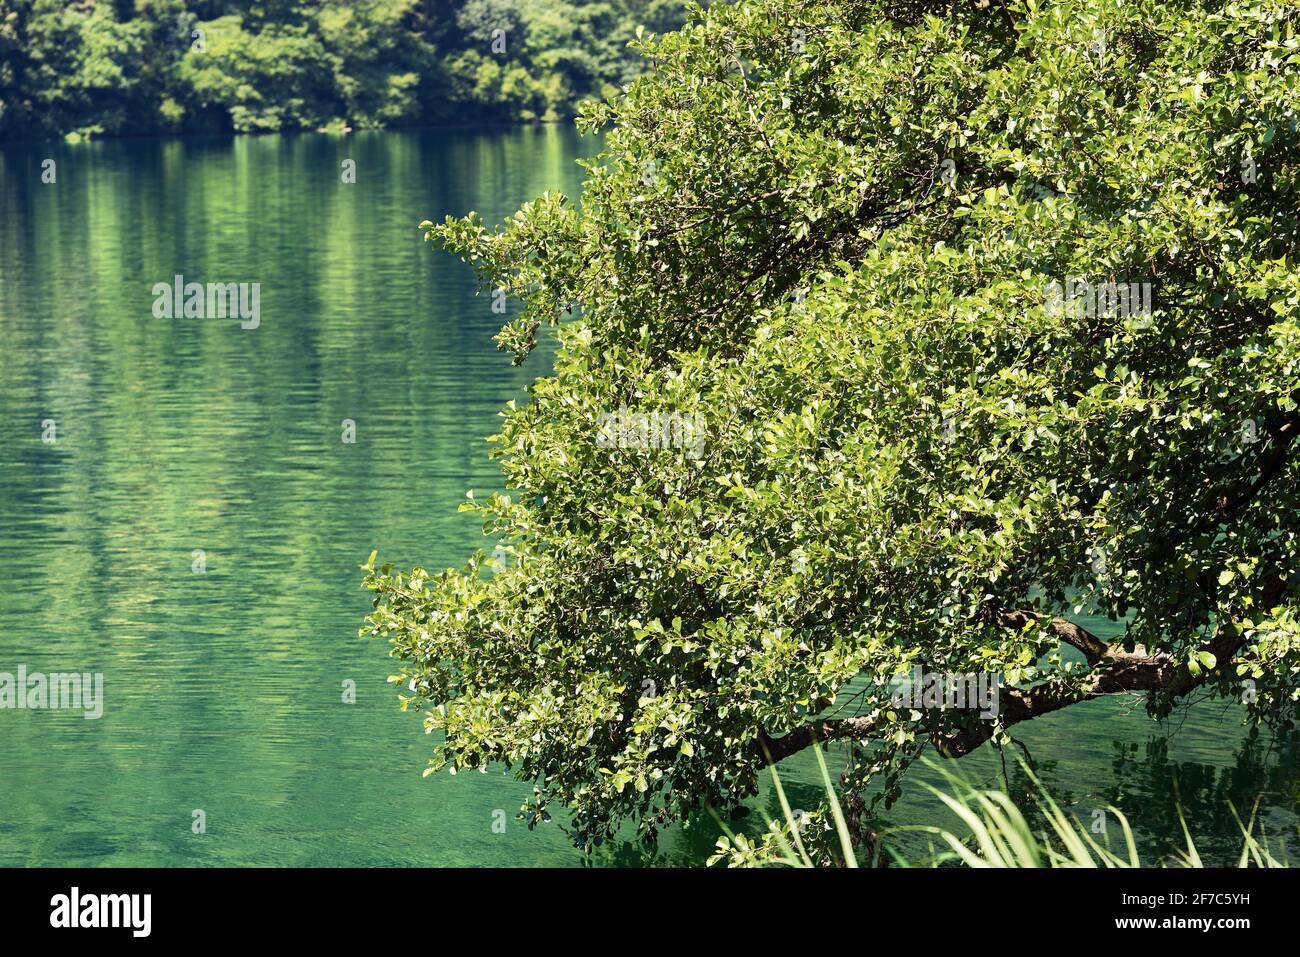 Close-up of a tree with lush green leaves above the surface of the water. Lago di Levico, small lake in Italian Alps. Levico Terme, Trentino, Italy. Stock Photo